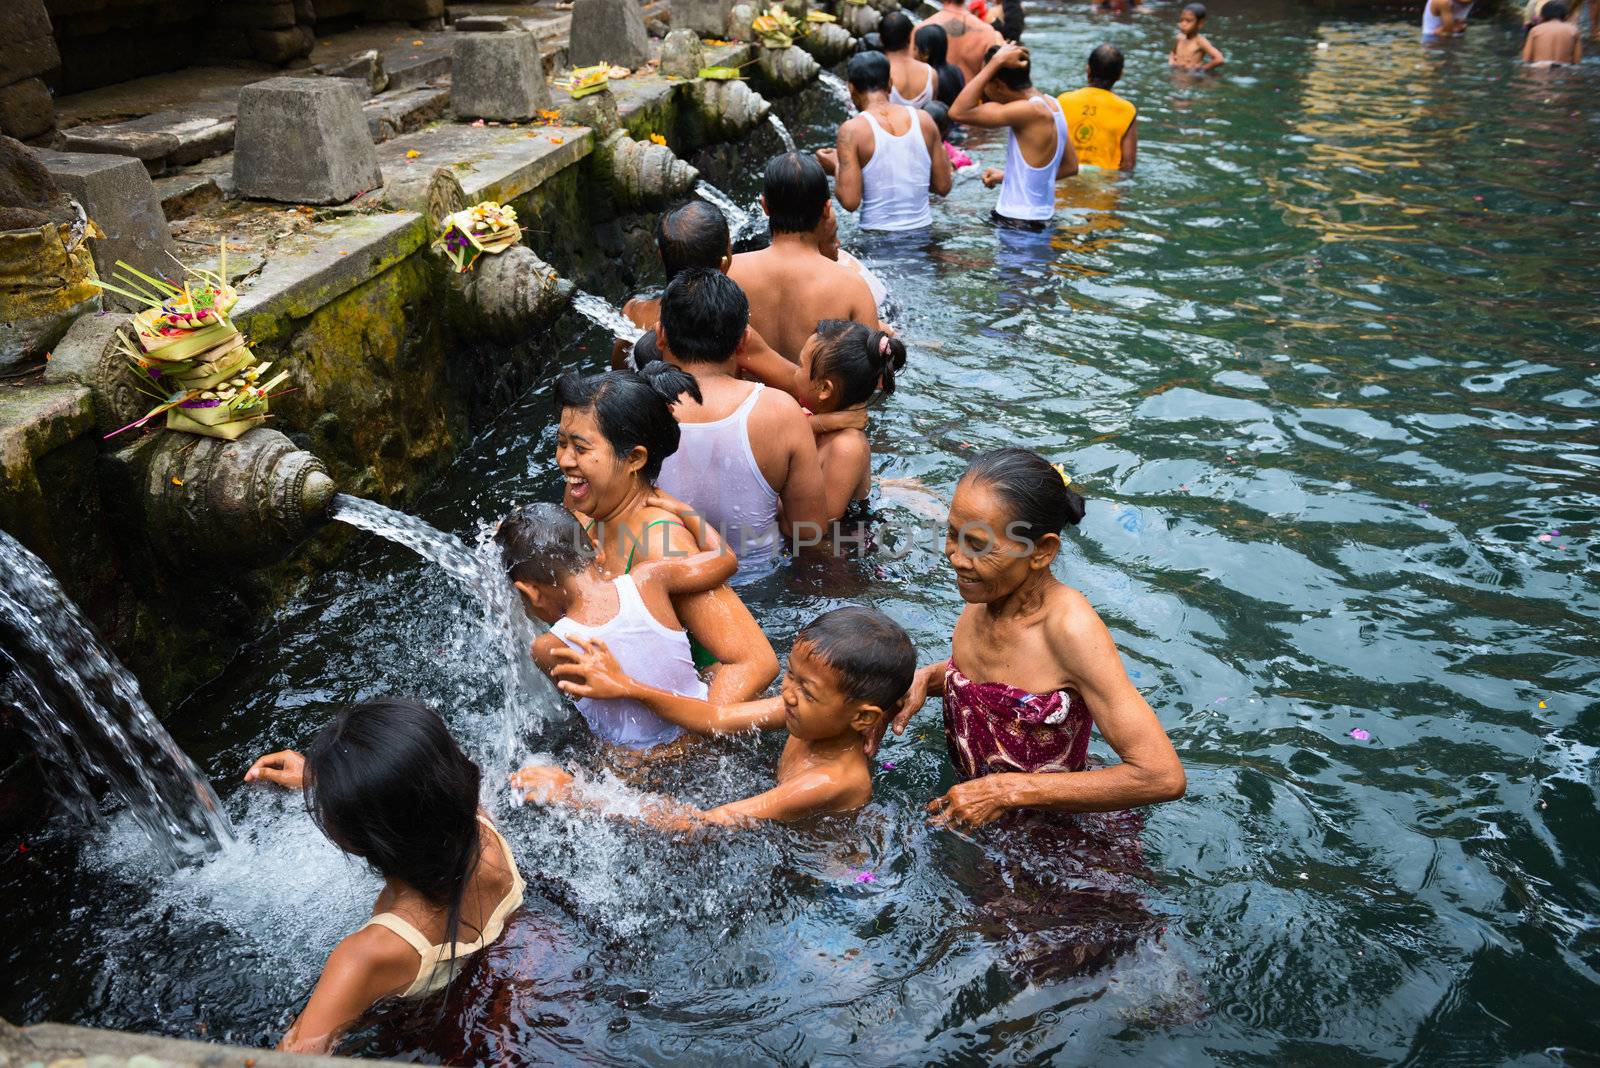 TIRTA EMPUL, INDONESIA - SEP 21: Bali prayers take a bath  in the sacred holy spring water on Sep 21, 2012 in Tirta Empul, Bali, Indonesia. It is famous place for purification of Bali people